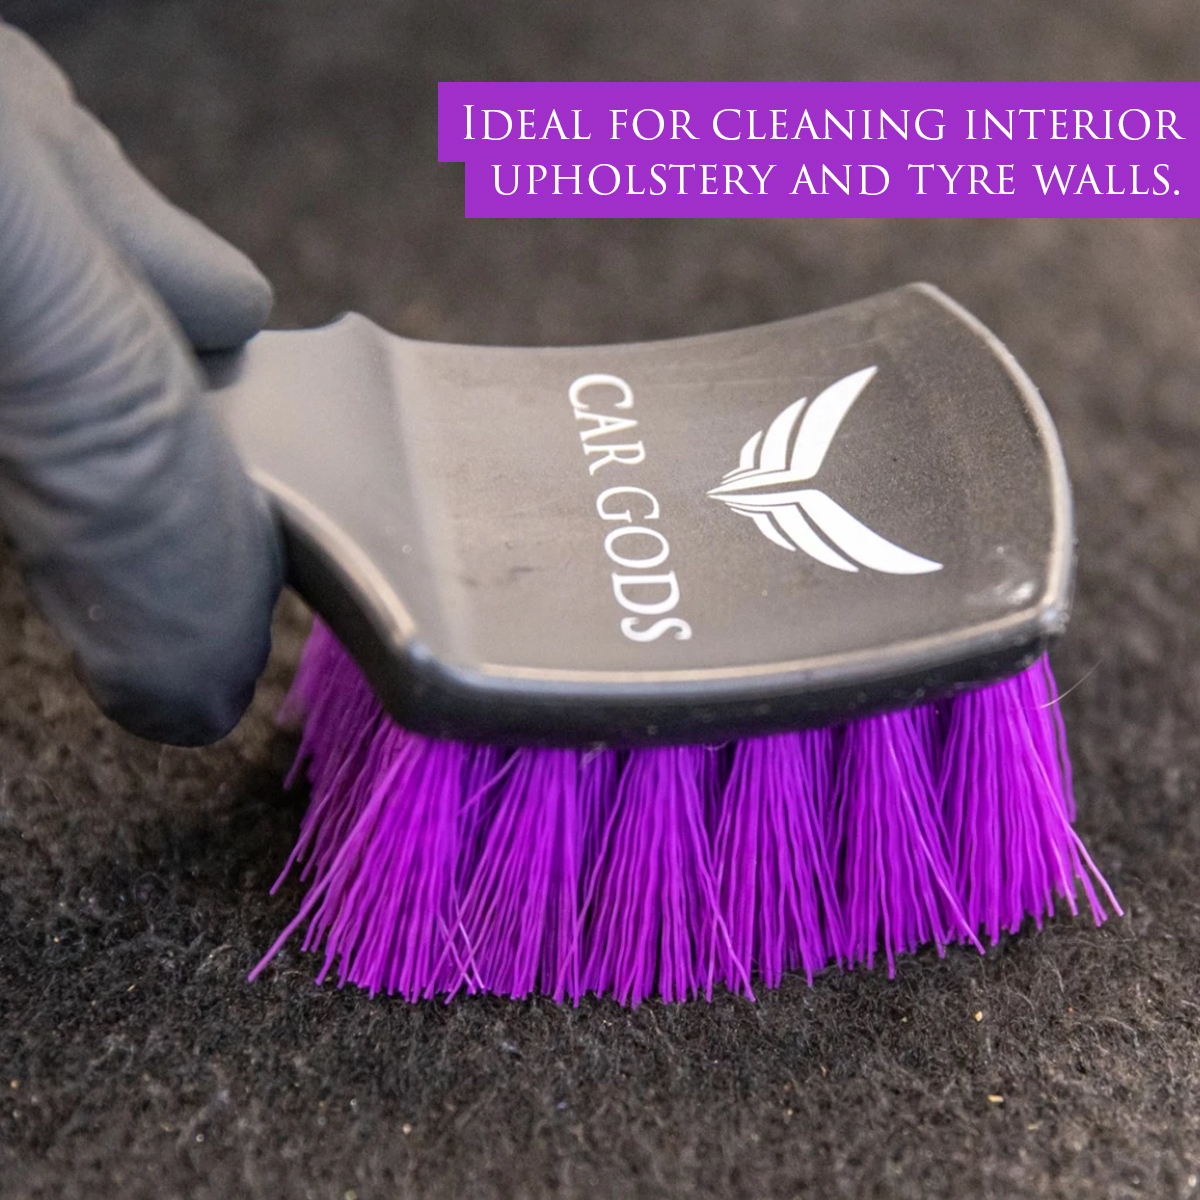 Ideal for cleaning both interior upholstery and tyre walls.